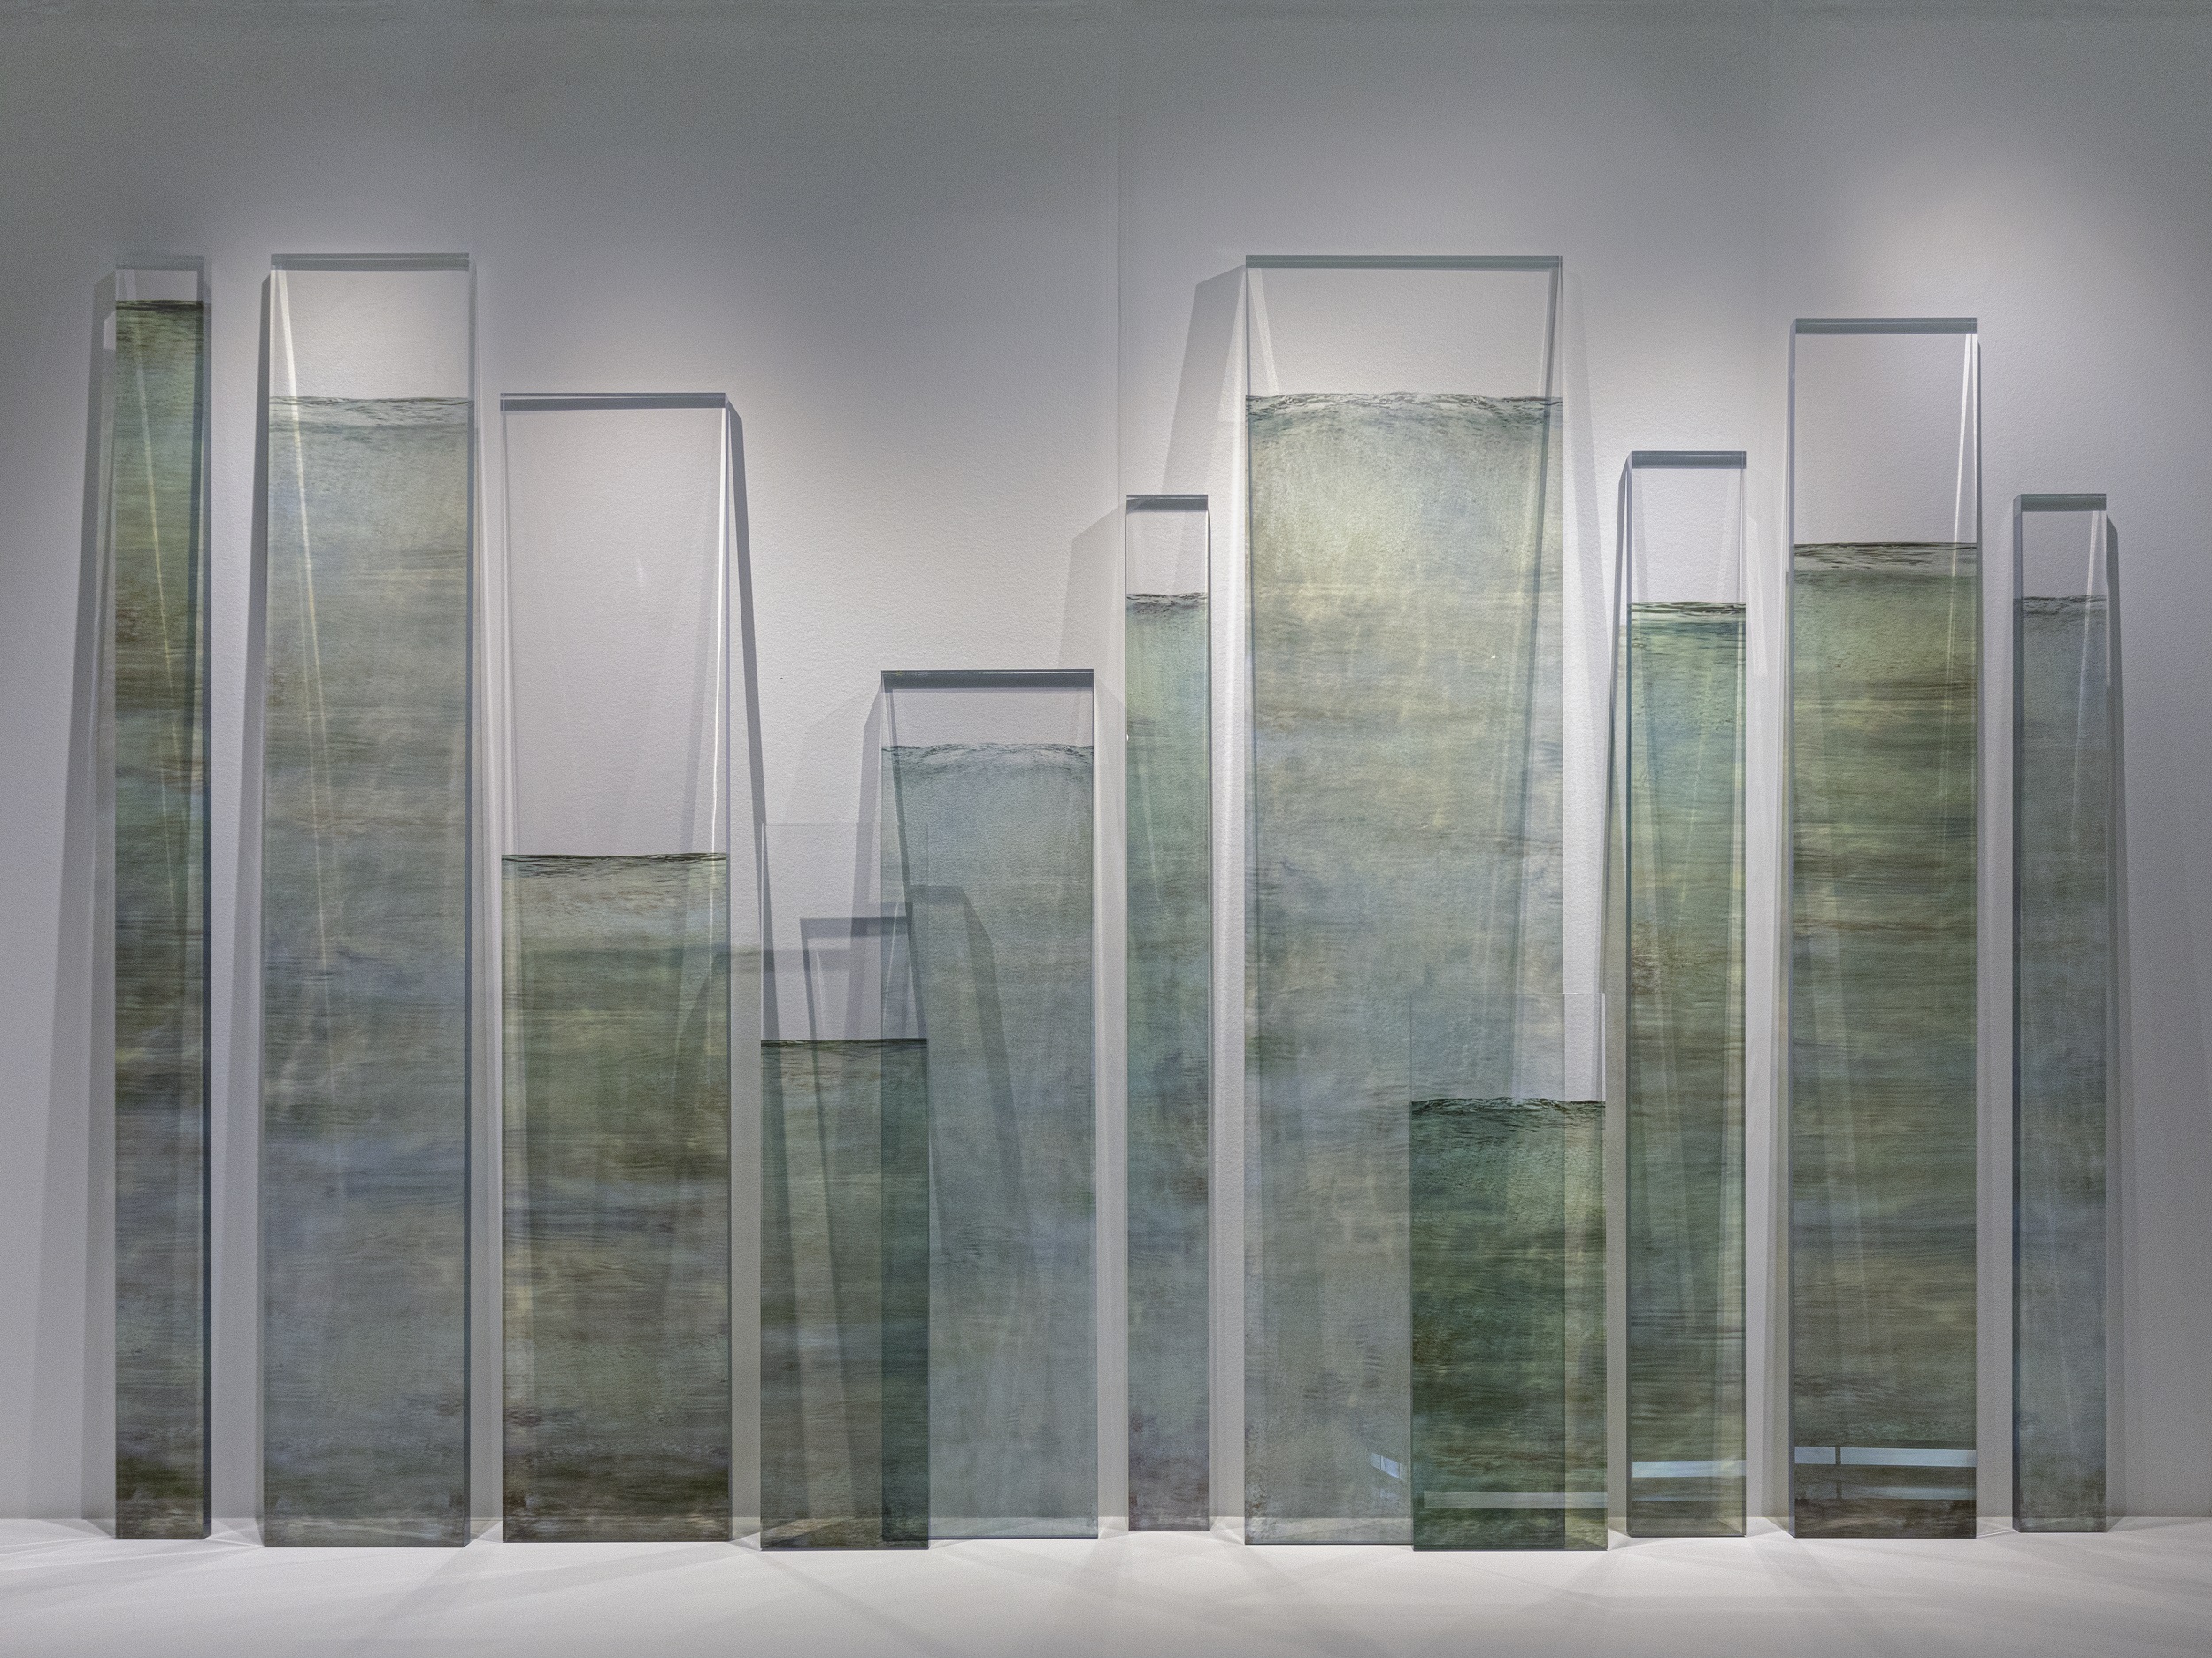 Photograph of artwork, composed of several vertical, translucent rectangles in shades of gray, green, and blue, resting against a white gallery wall